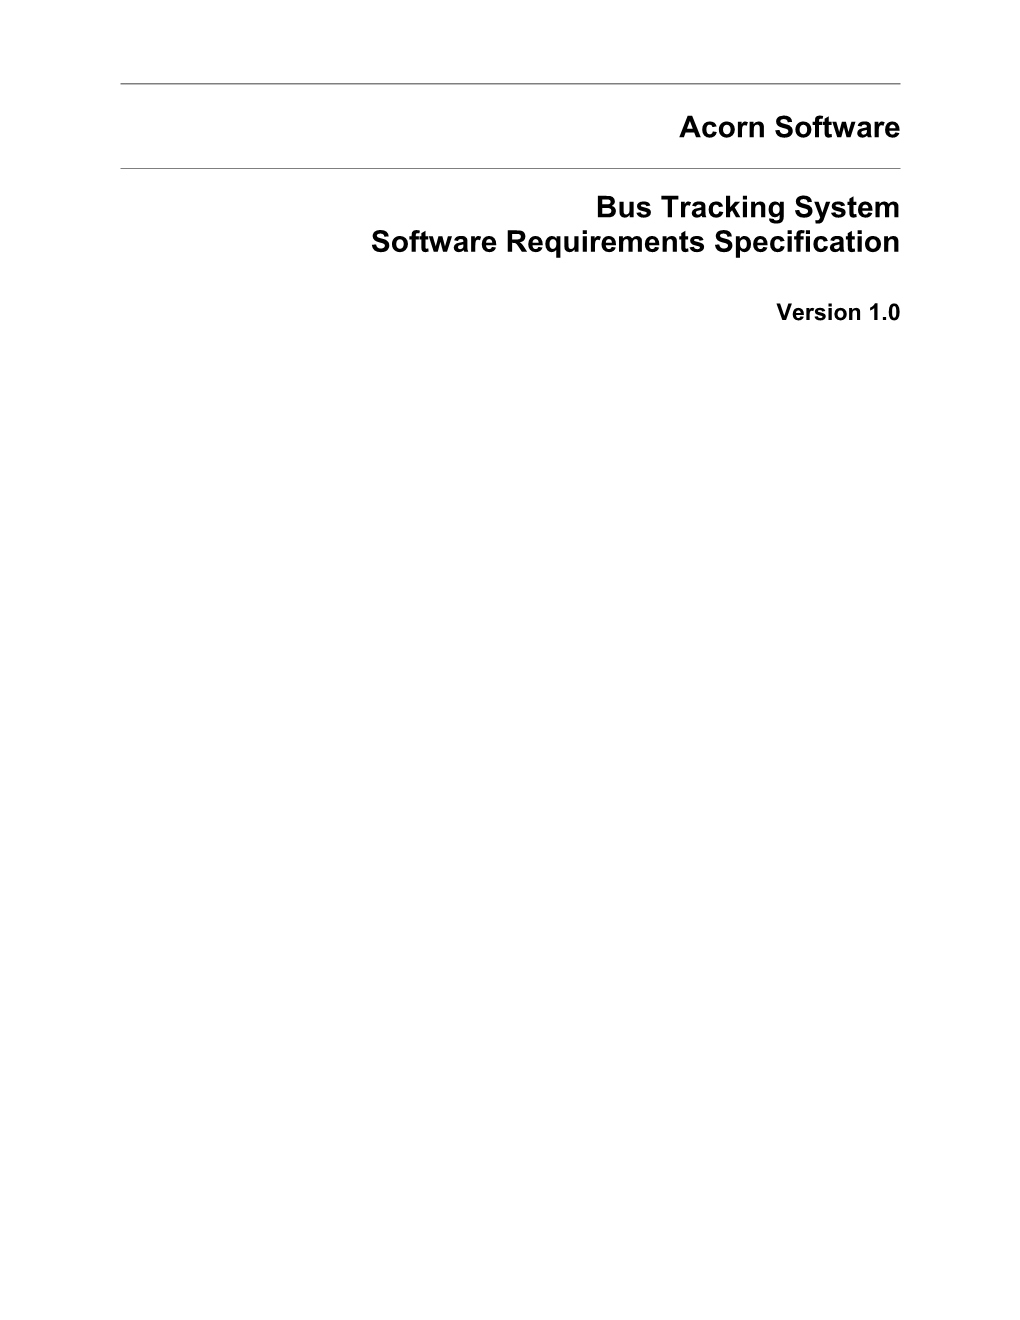 Software Requirements Specification s4